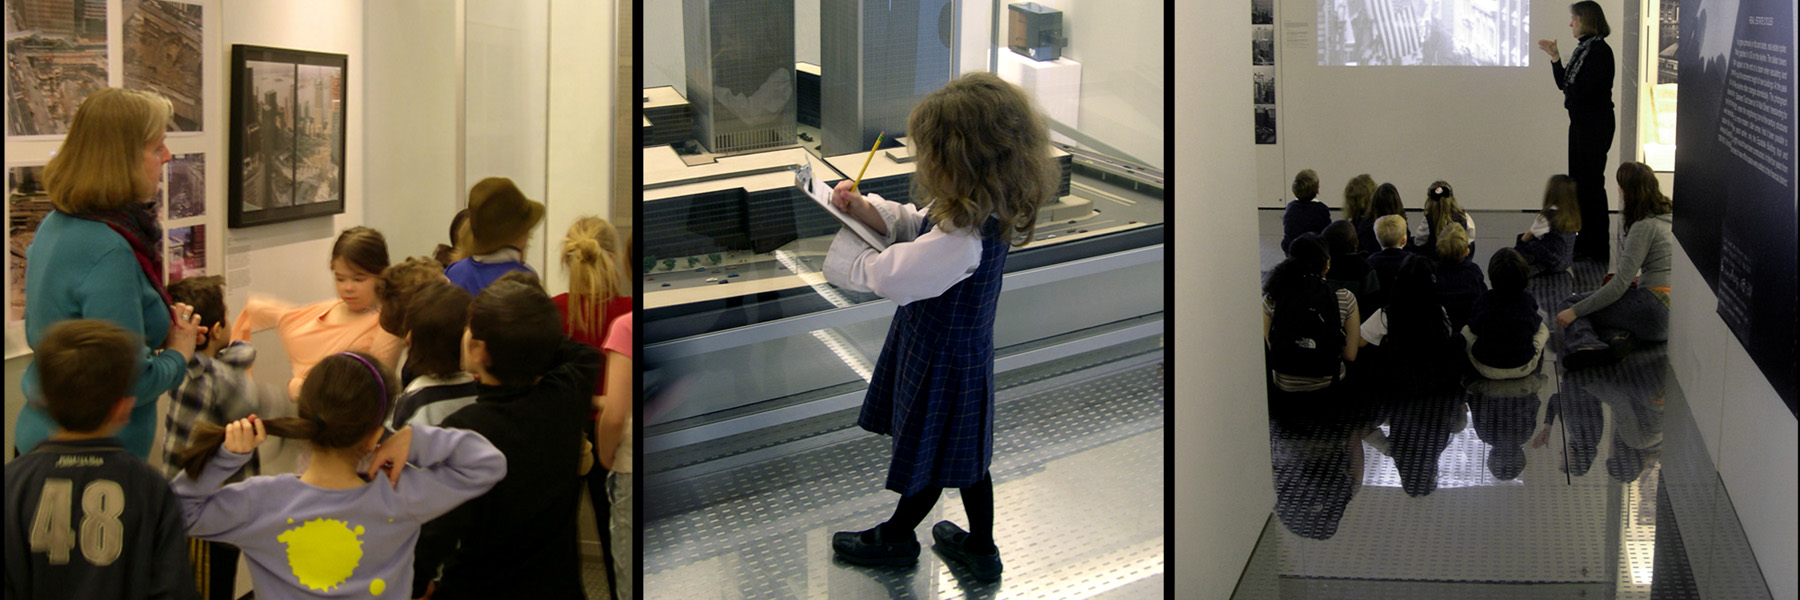 Photographs of school children participating in educational programs at The Skyscraper Museum